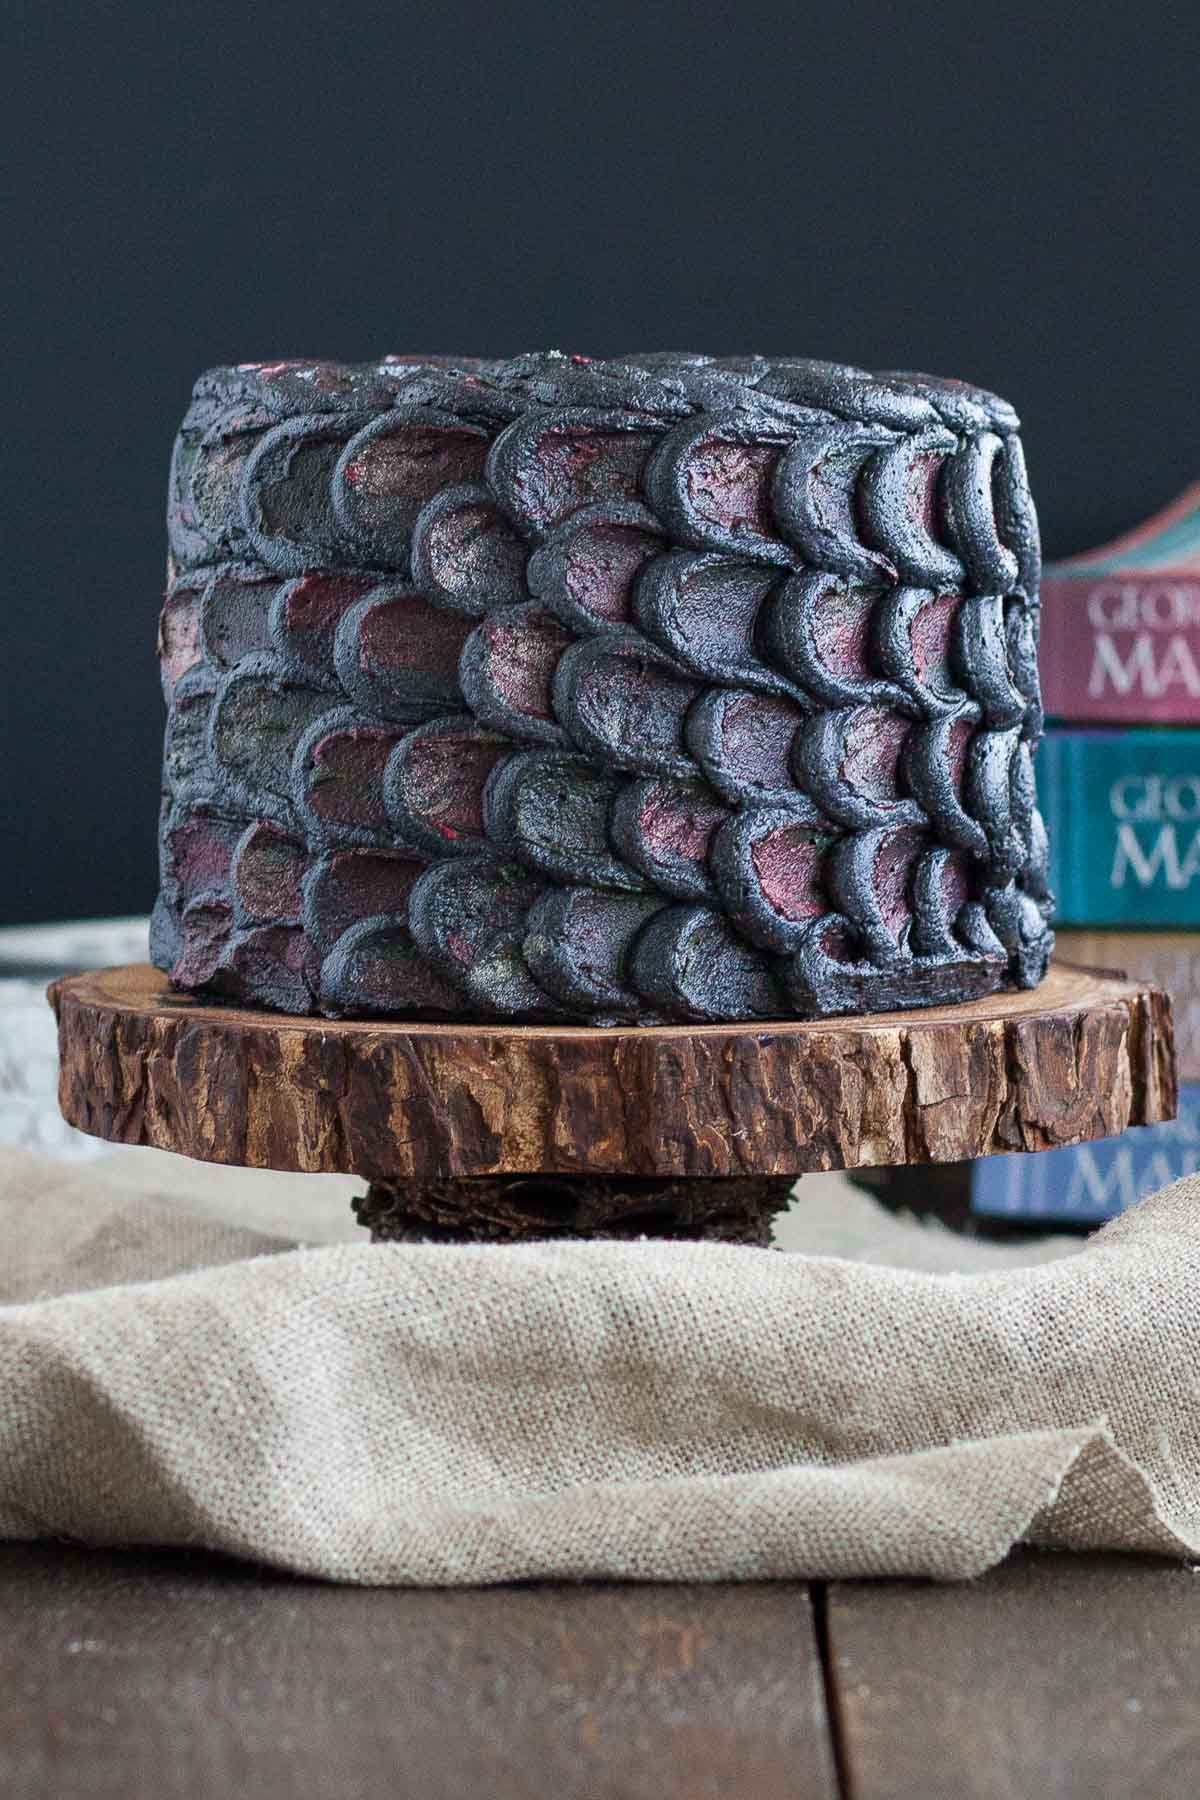 Cake decorated with dragonscales on a rustic cake stand with Game of Thrones books in the background.